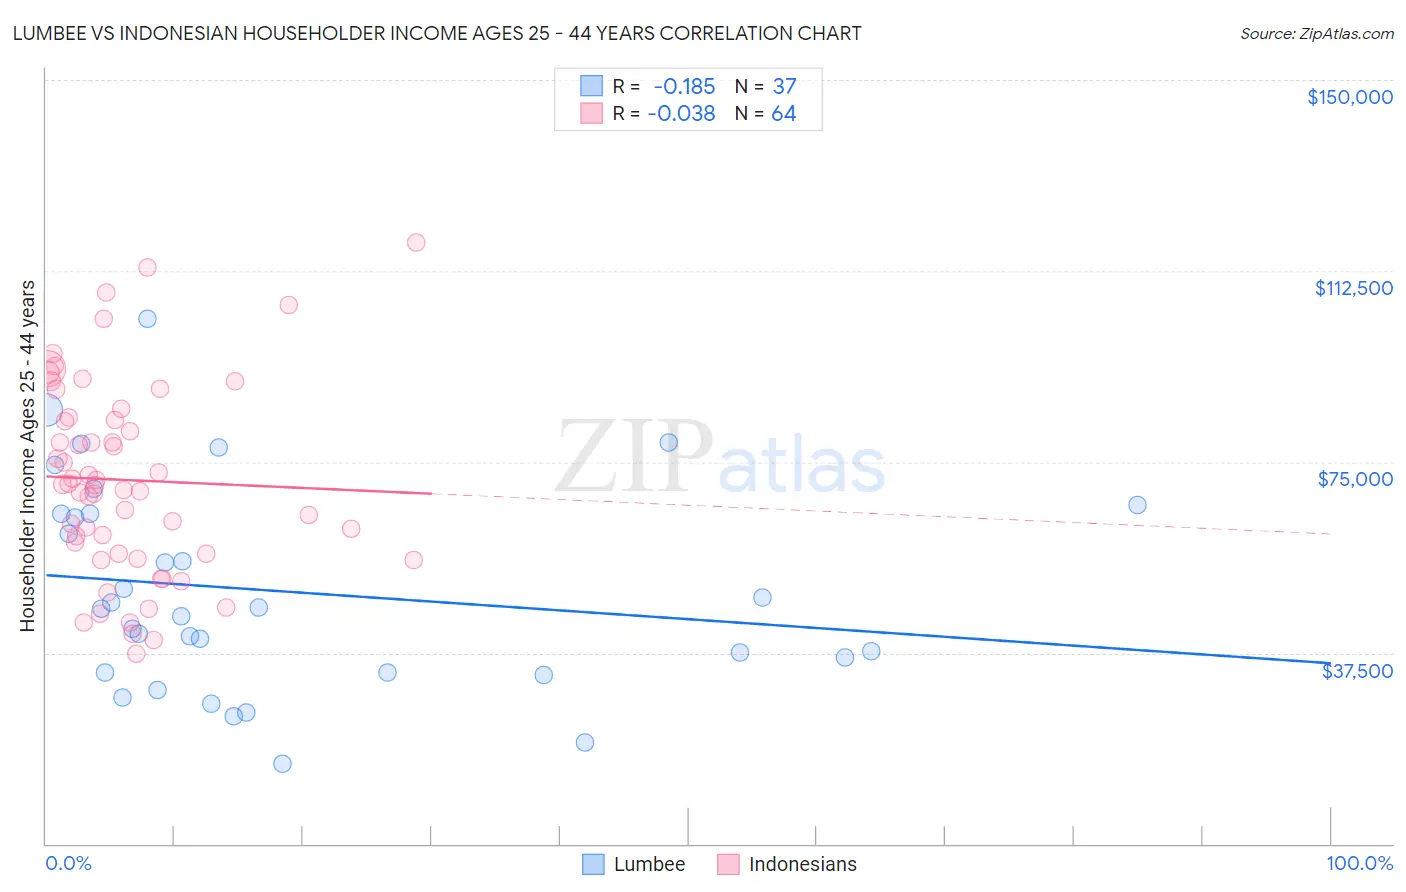 Lumbee vs Indonesian Householder Income Ages 25 - 44 years